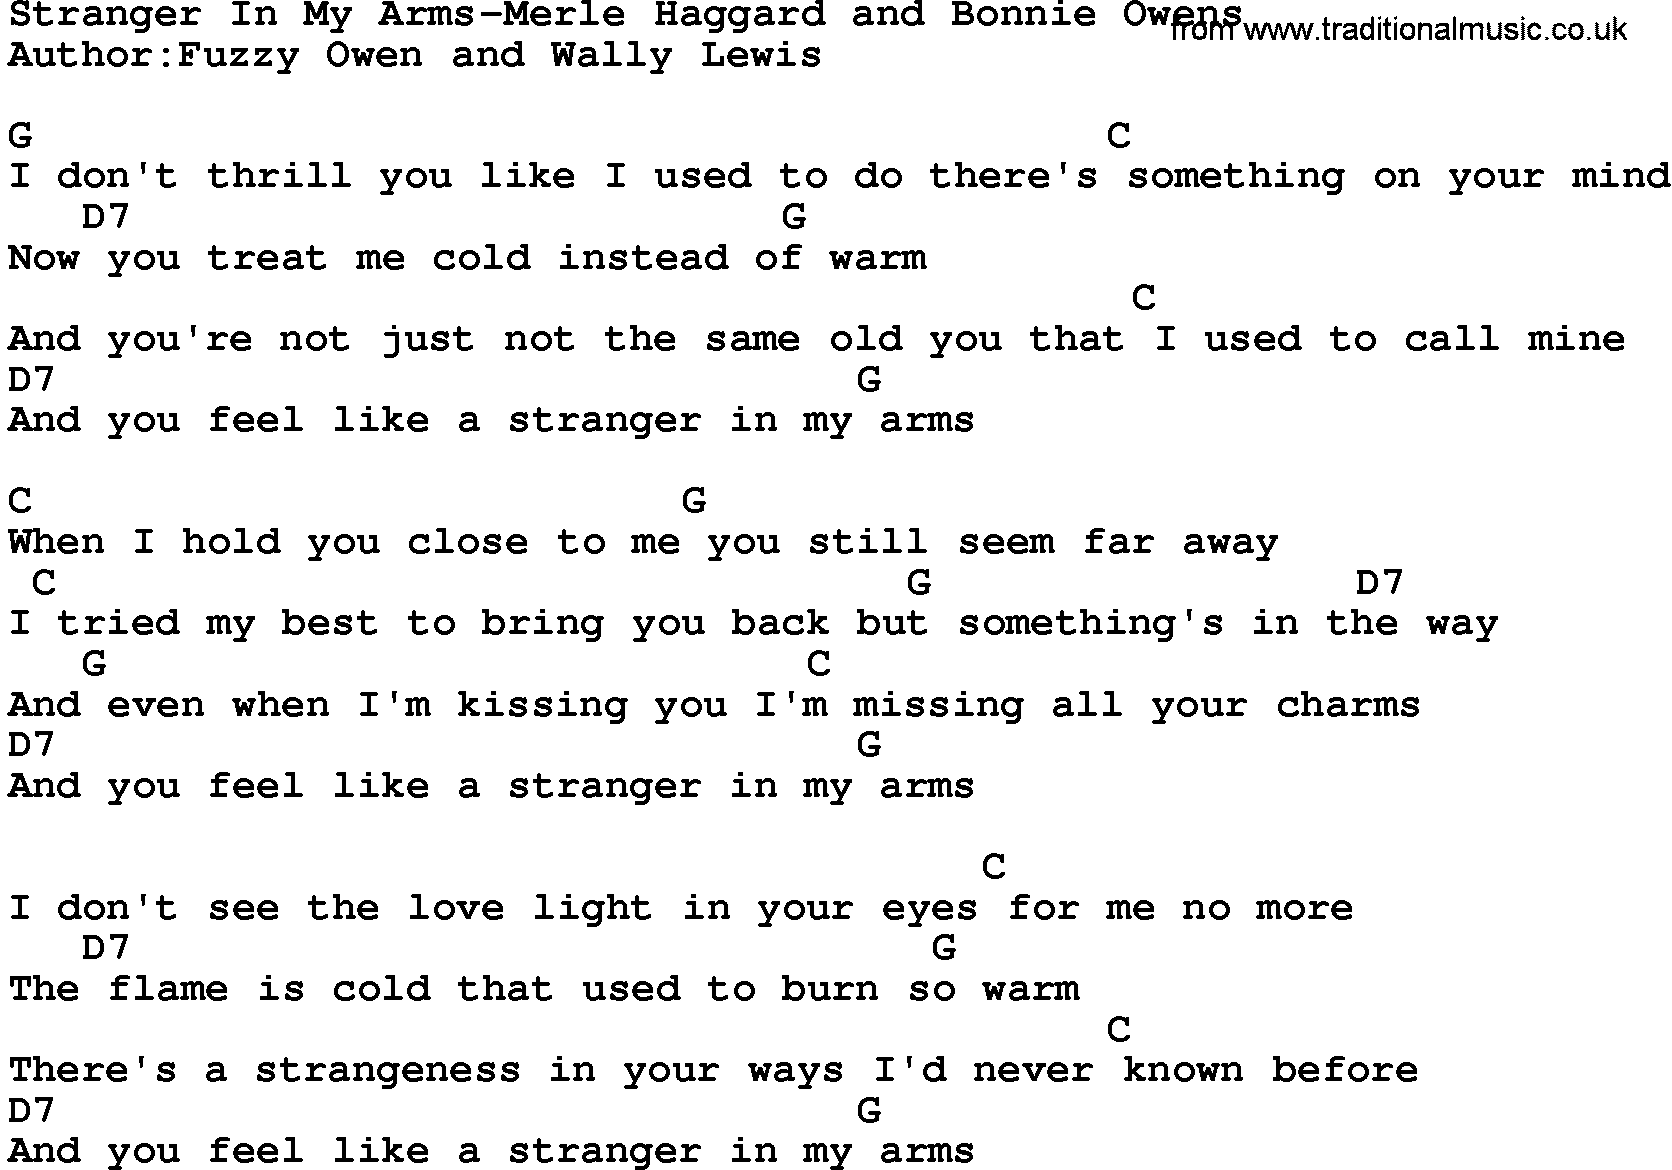 Country music song: Stranger In My Arms-Merle Haggard And Bonnie Owens lyrics and chords